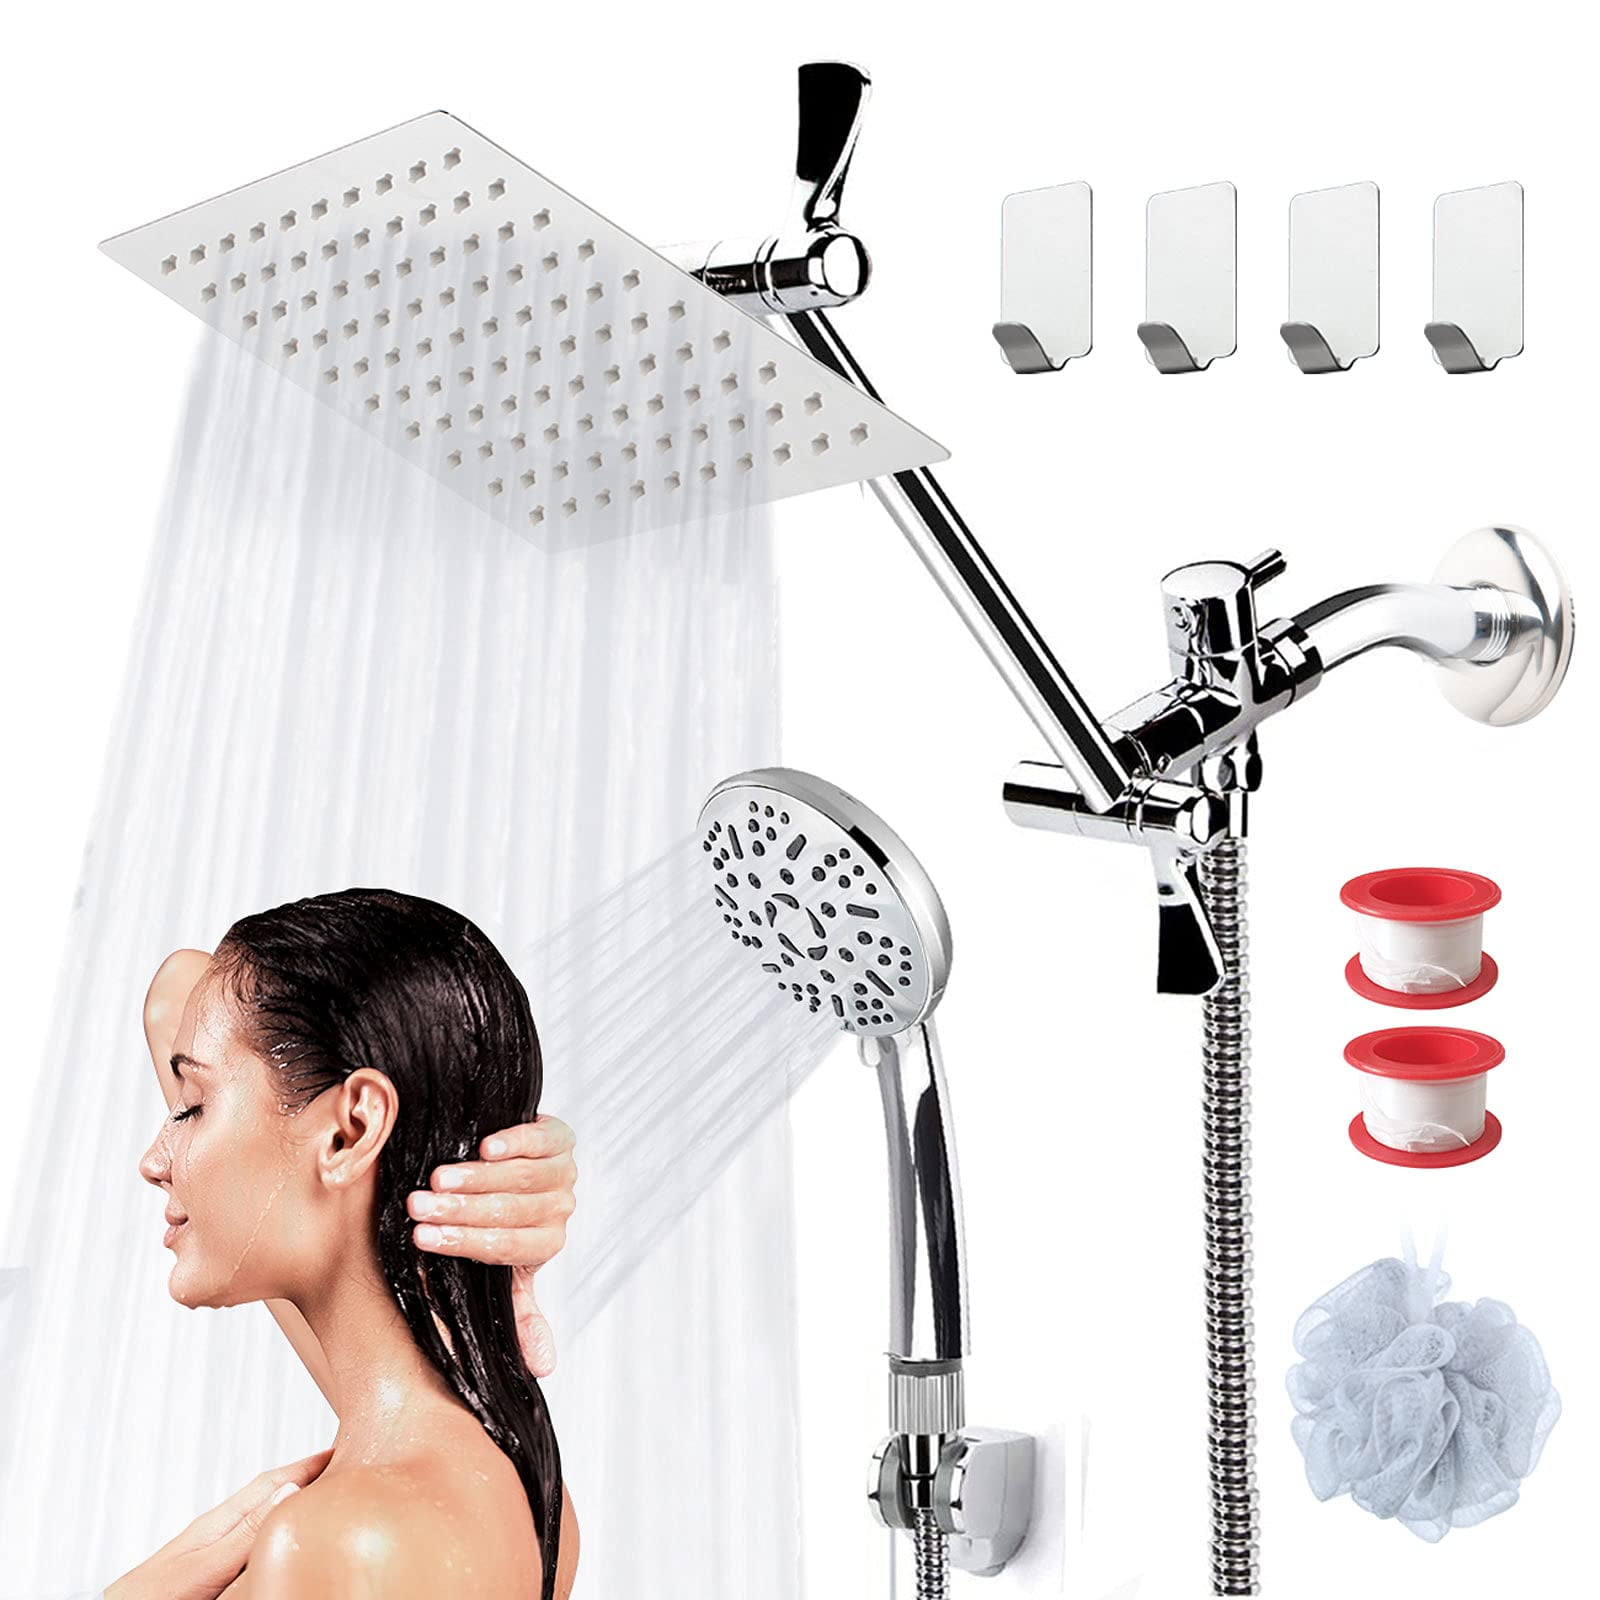 High Pressure 8'' Rainfall Stainless Steel Shower Head/Handheld Shower with ON/OFF Pause Switch Shower Combo with hose,Adhesive Shower Head Holder Shower Head with handheld 